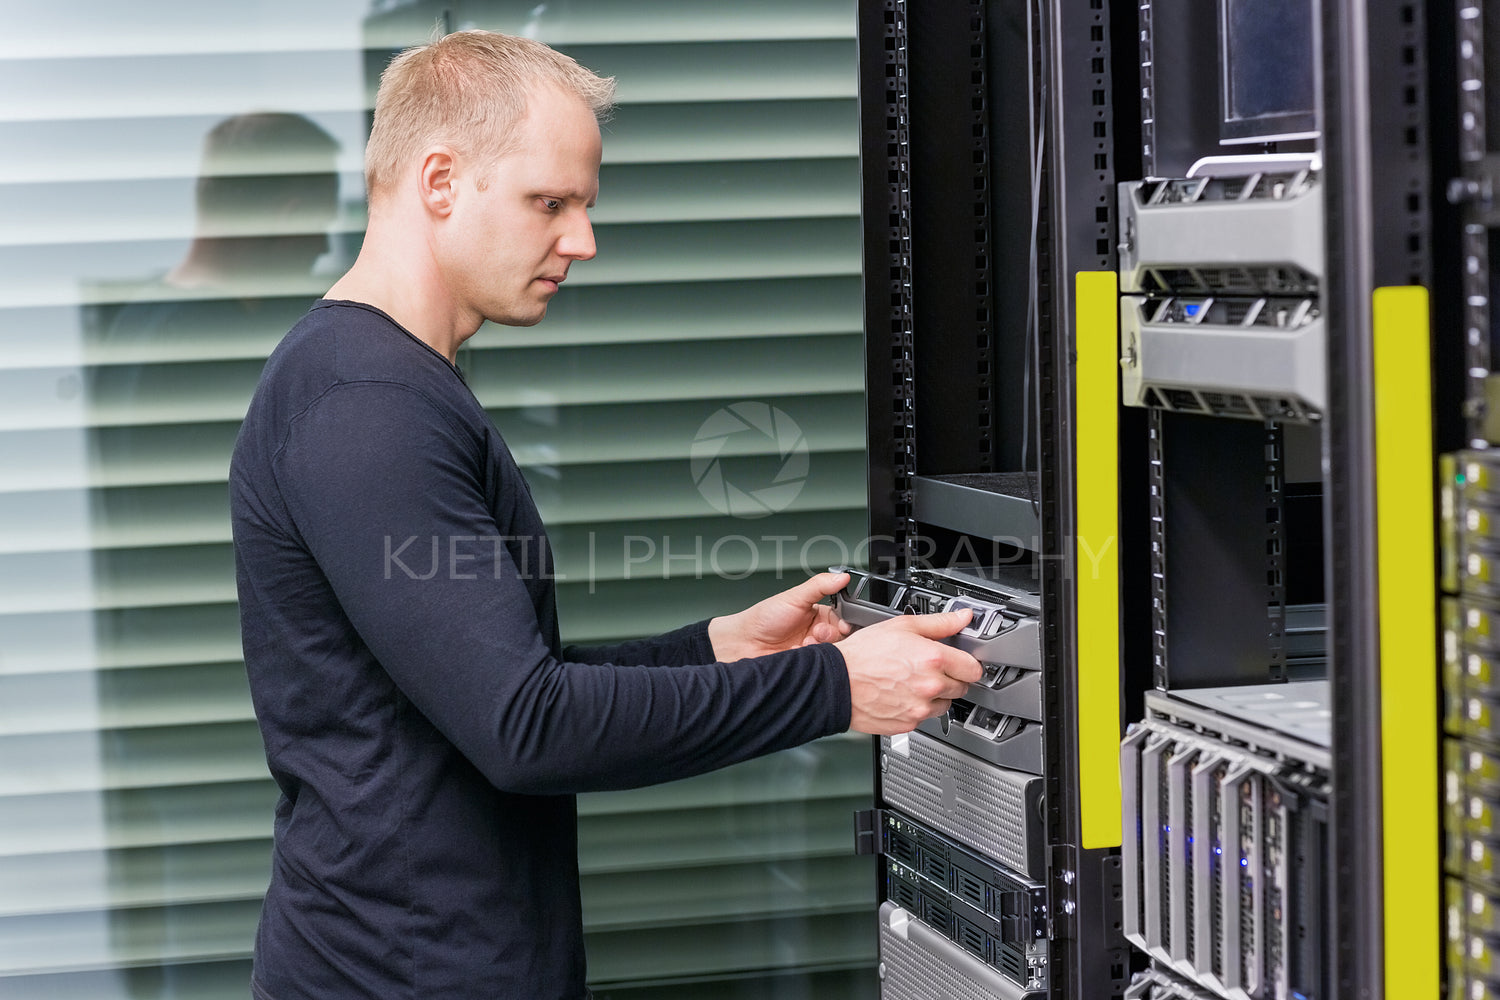 It professional working in datacenter